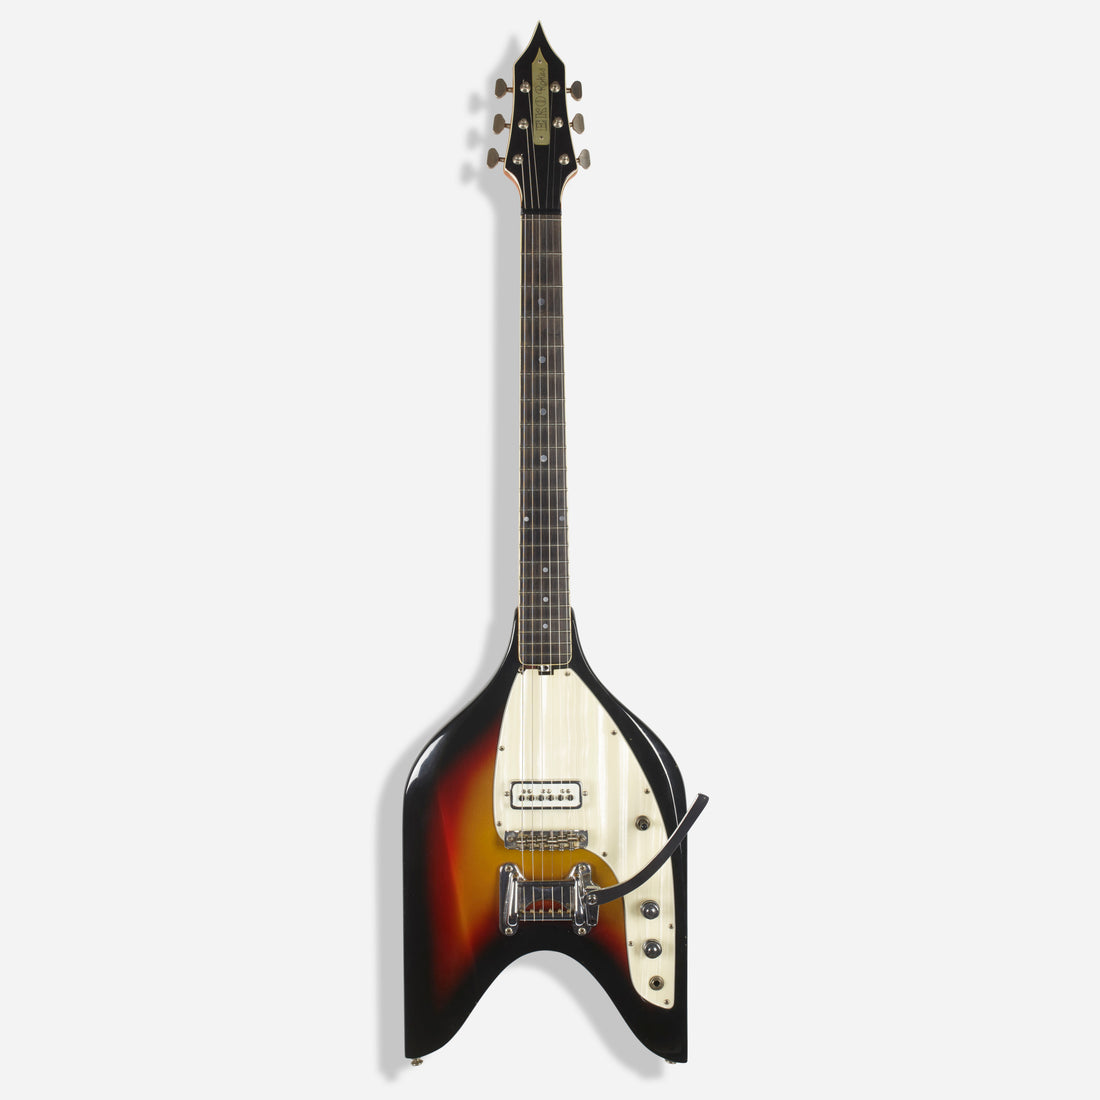 One For The Space Age - Eko Rokes Guitar